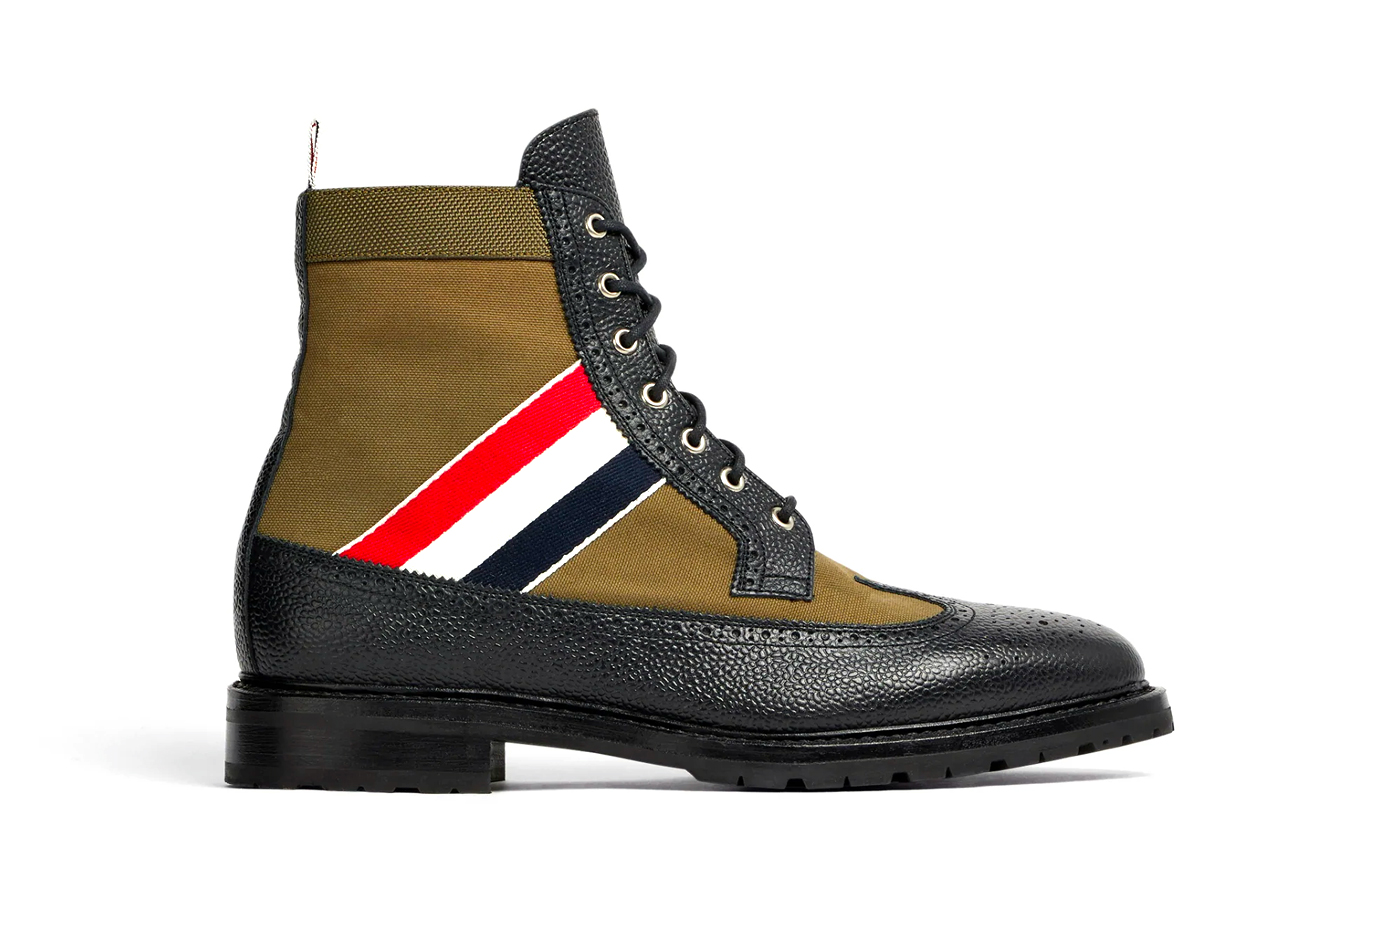 Thom Browne RWB Webbing Longwing Boot navy green red white blue tricolor canvas pebble grain leather waxed canvas upper lace up fastening calfskin lining